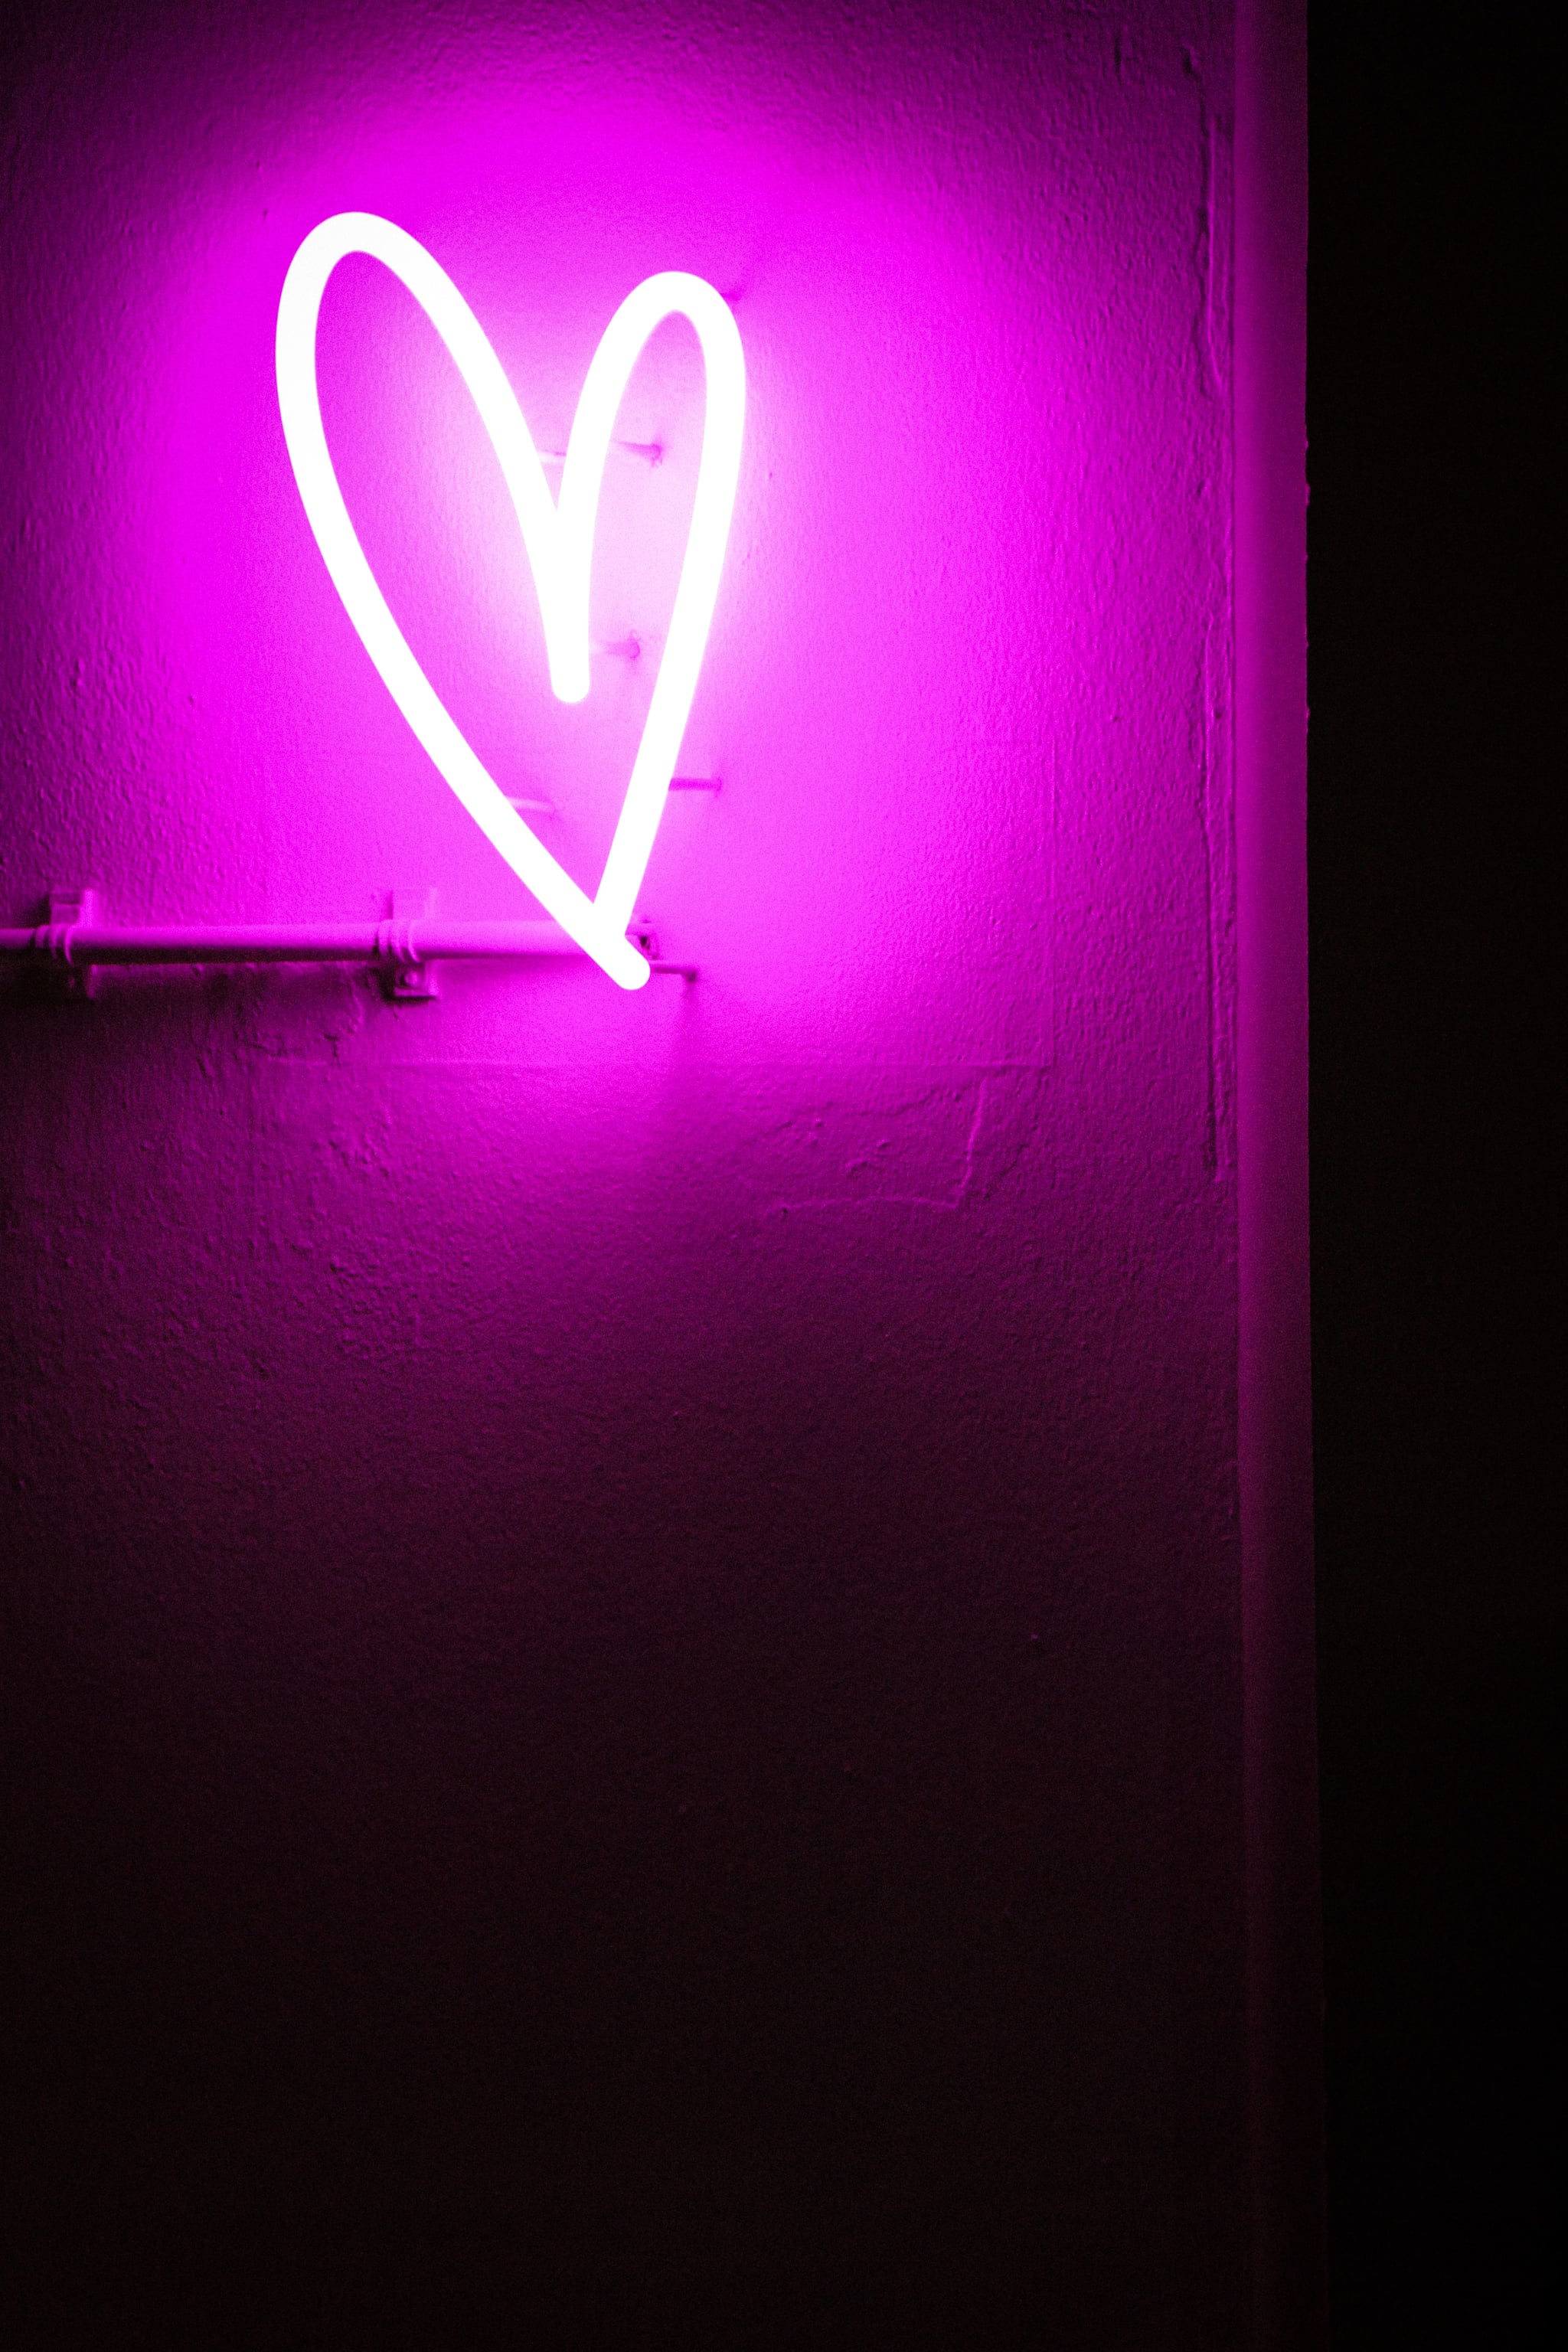 Neon Heart Valentine S Day Iphone Wallpaper The Dreamiest Iphone Wallpapers For Valentine S Day That Fit Any Aesthetic Popsugar Tech Photo 4